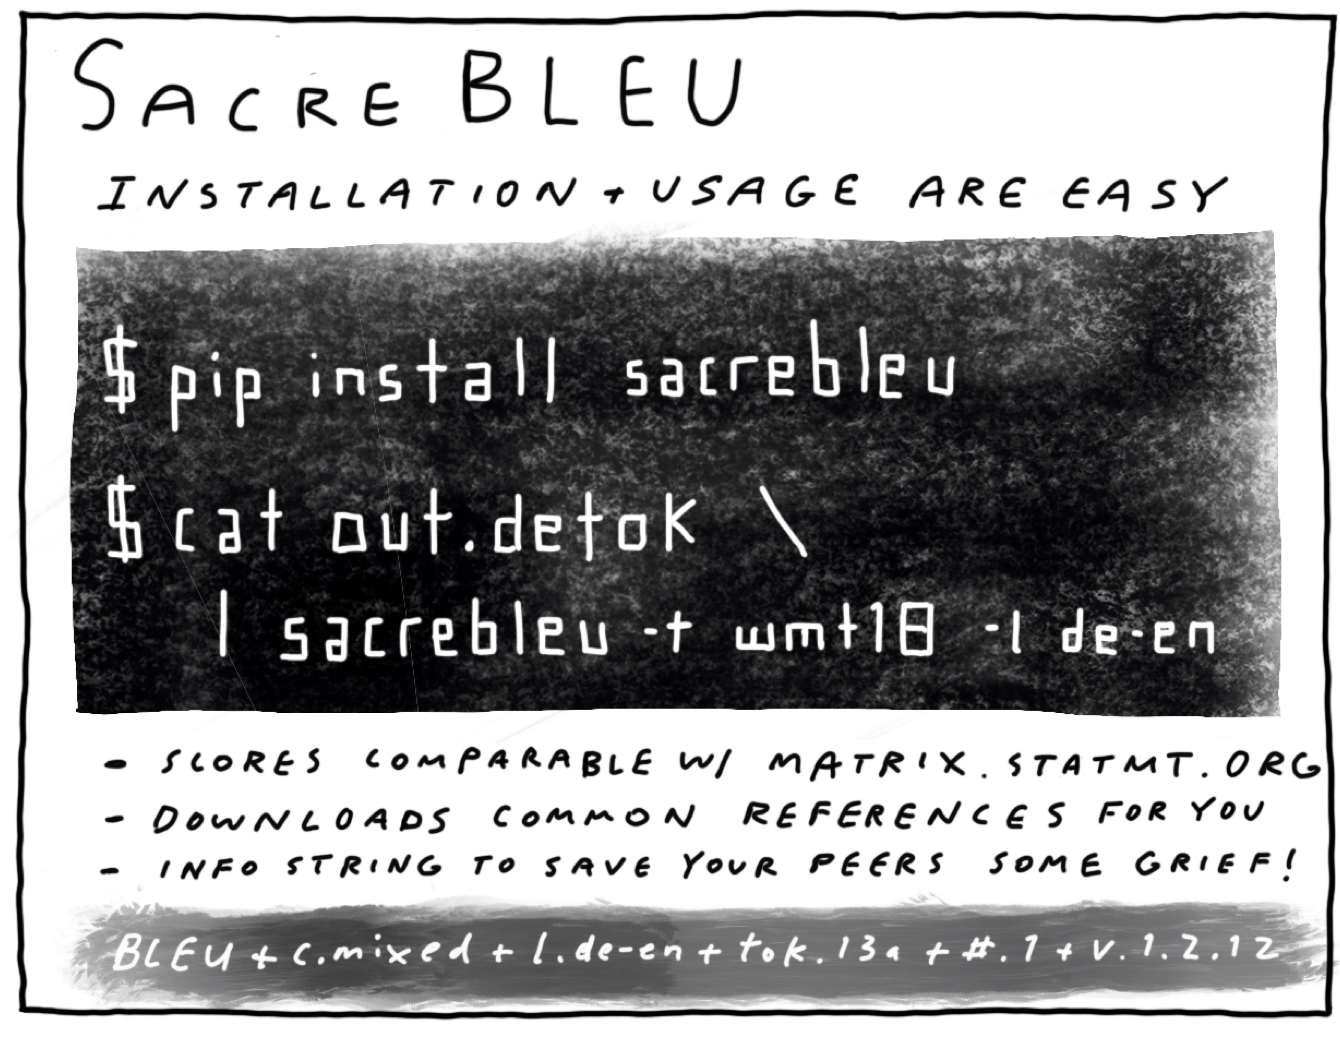 Text reads "SacreBLEU: installation and usage are easy". It shows a bash shell prompt containing two commands for installing and using sacrebleu: "pip install sacrebleu" and "cat out.detok | sacrebleu -t wmt18 -l de-en". Underneath is a bulleted summary nothing that (*) scores comparable w/ matrix.statmt.org (*) downloads common references for you (*) info string to save your peers some grief!. At the very bottom is sacrebleu's verbose signature string.